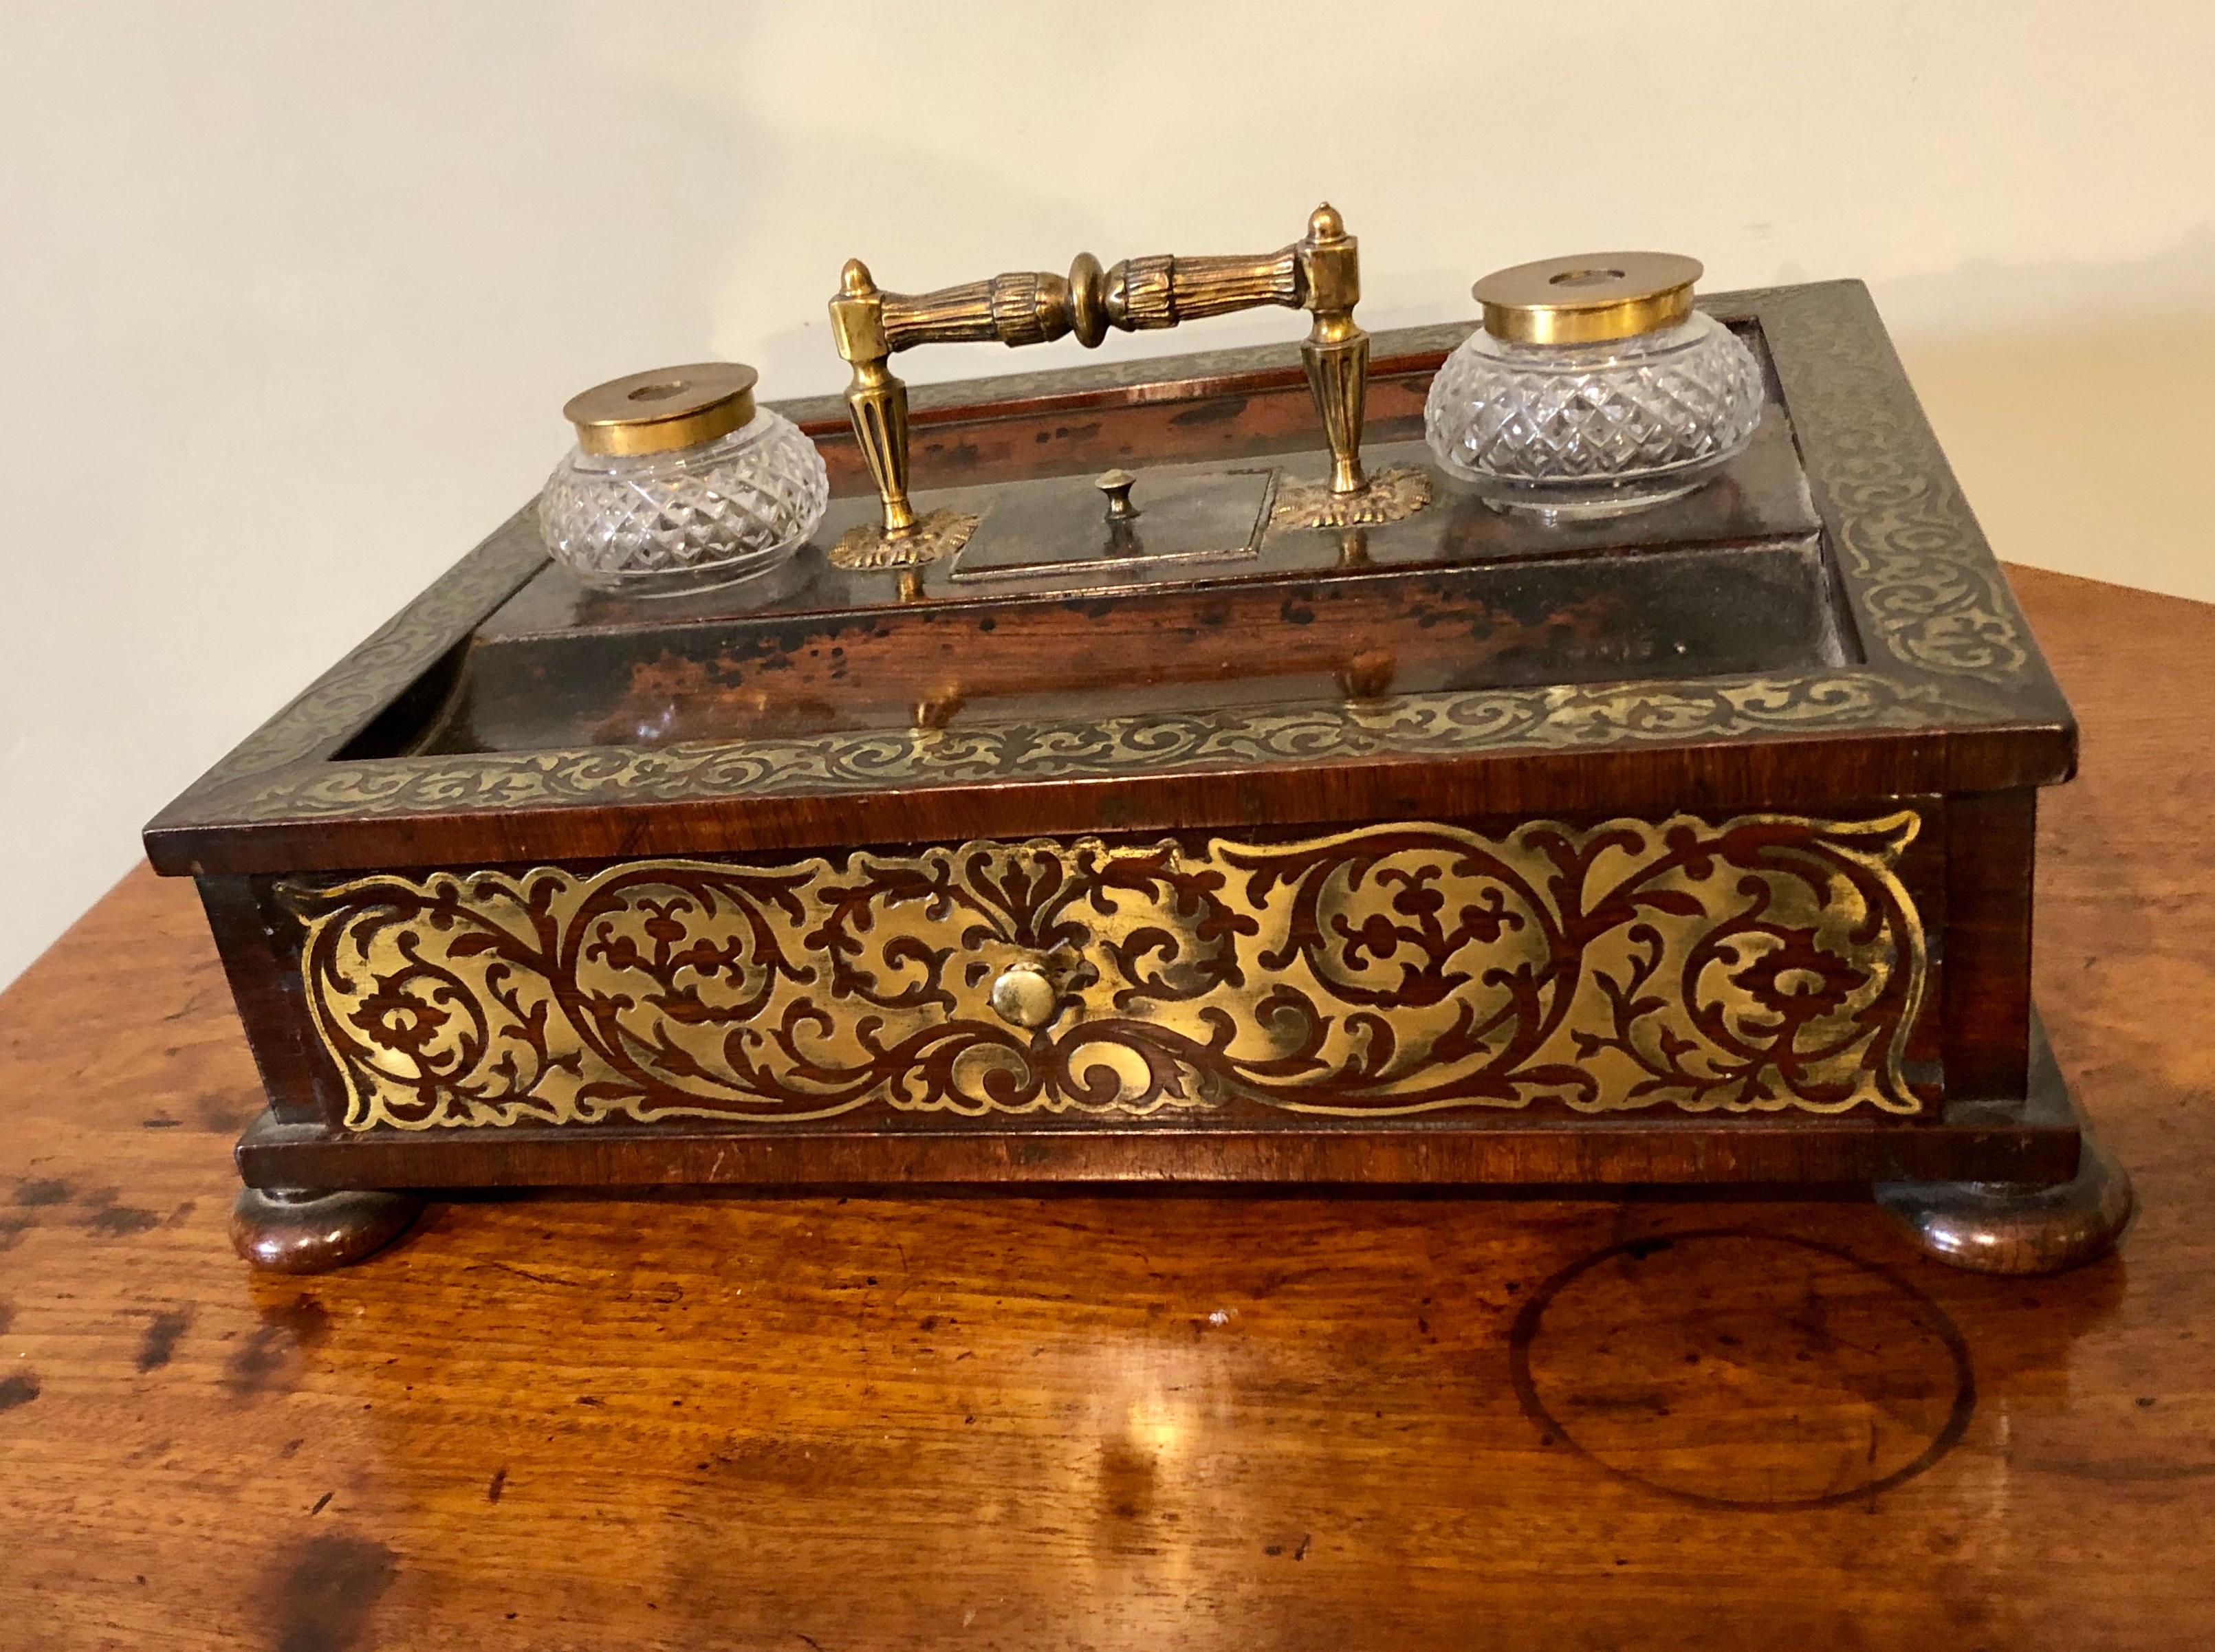 English 19th Century Regency Brass Inlaid Desk Pen and Ink Stand